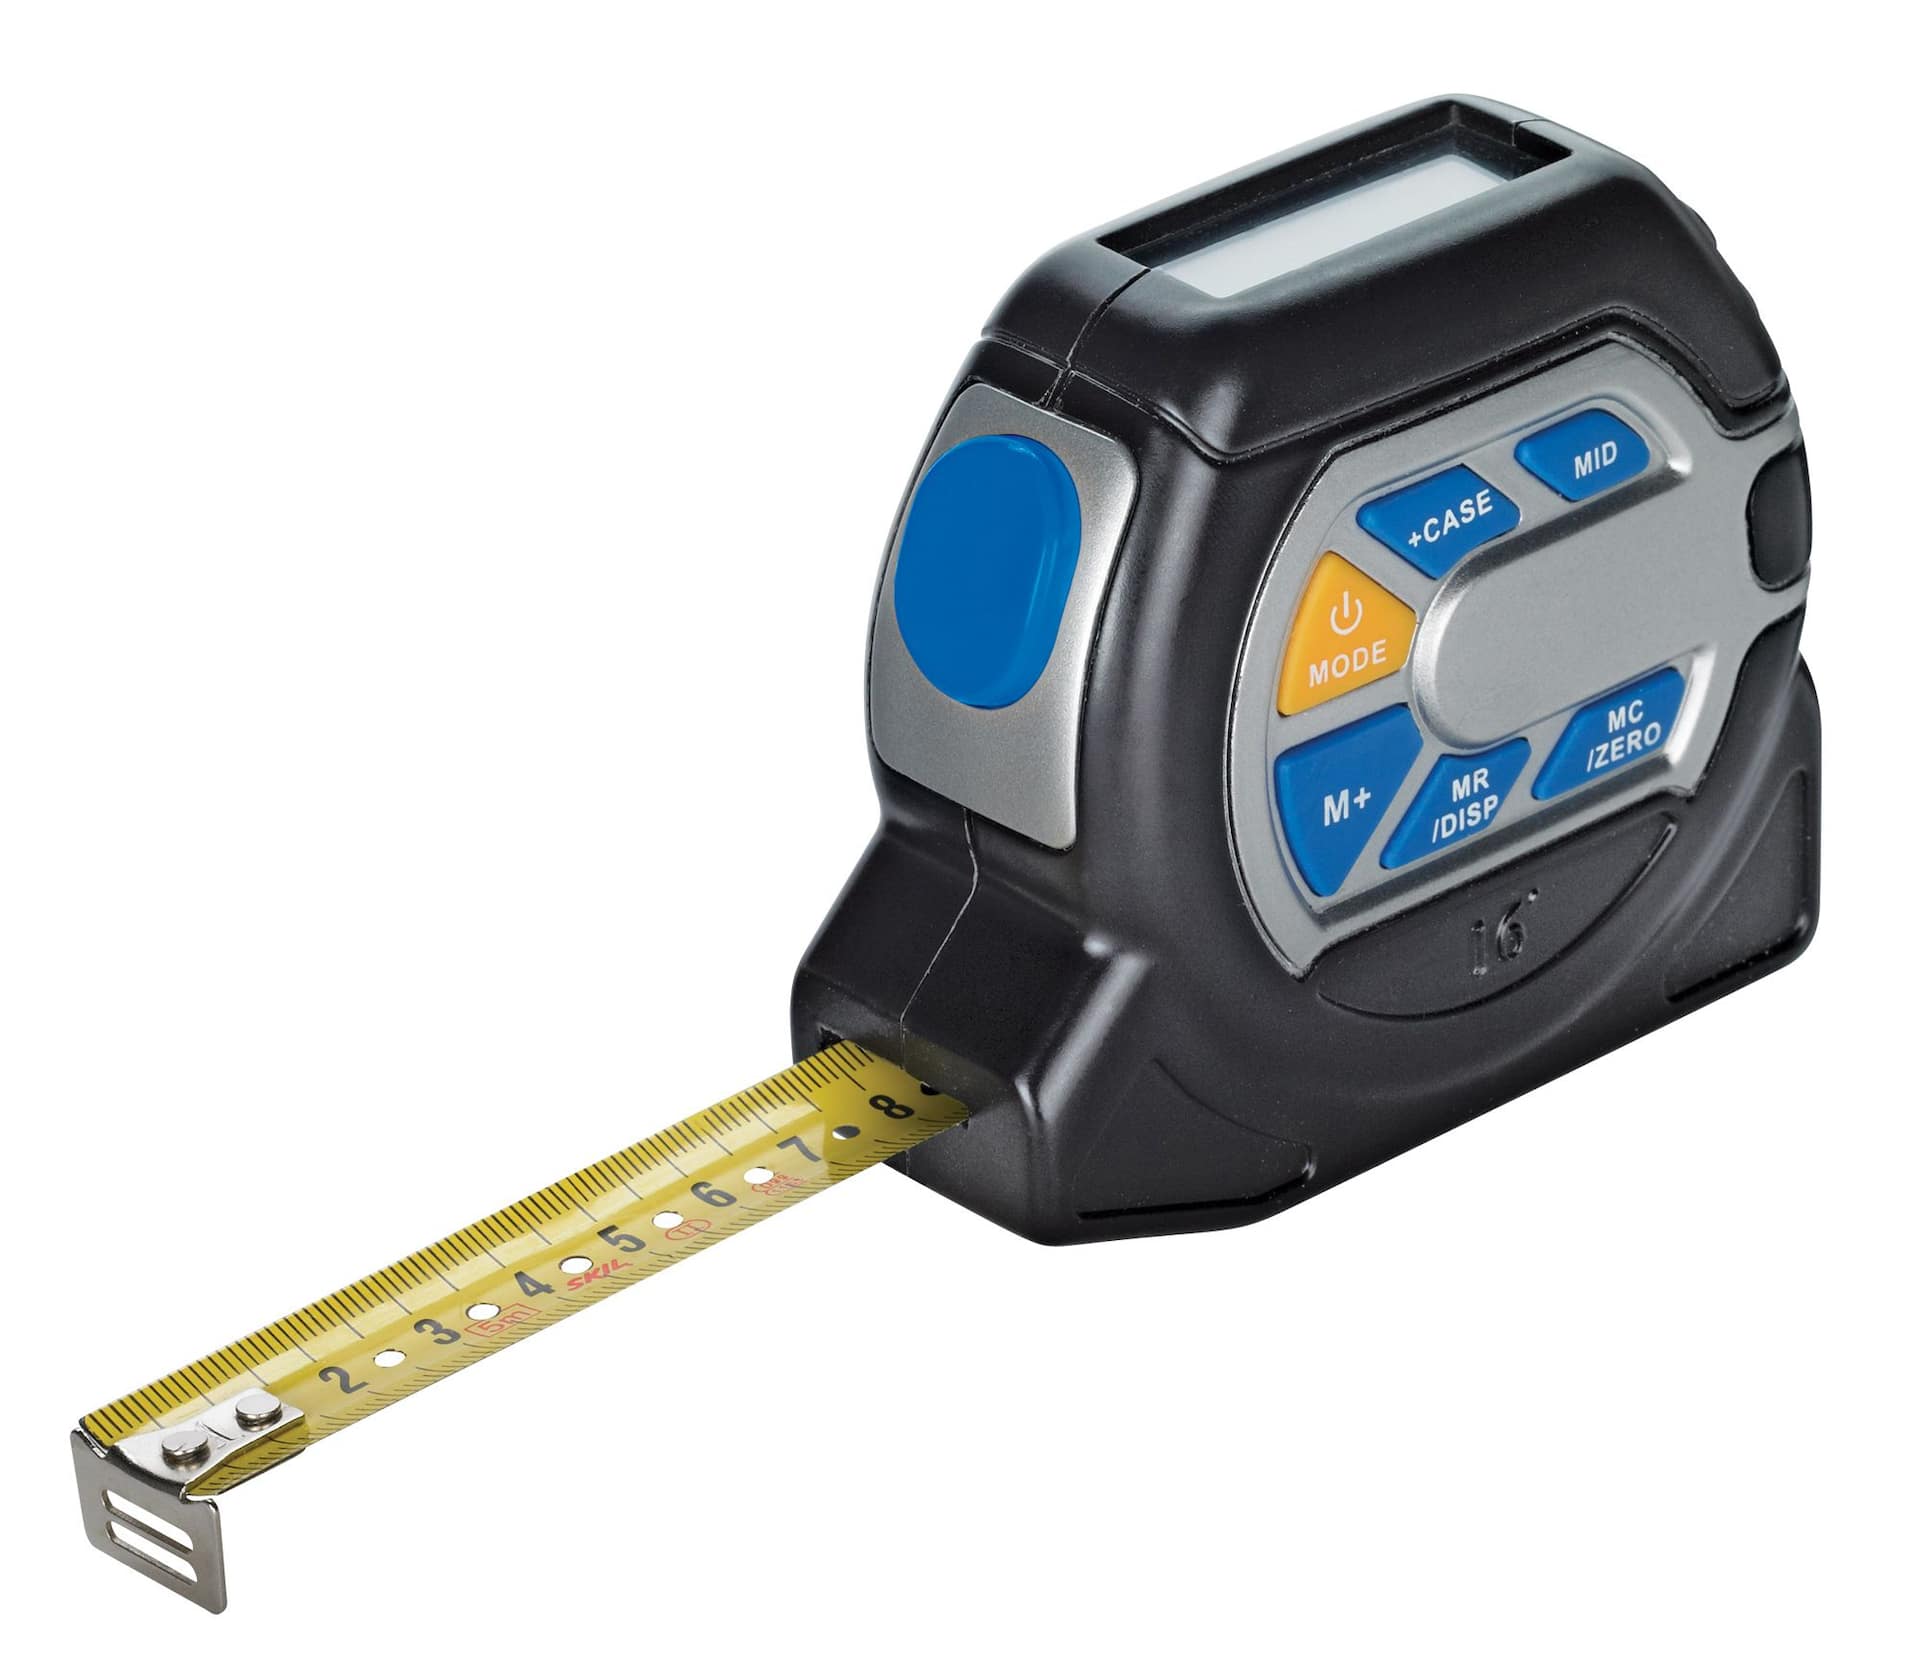 https://media-www.canadiantire.ca/product/fixing/tools/cutting-measuring/0577105/mastercraft-16-electronic-tape-11f766a3-8303-4d58-821f-a1ecdf01e749-jpgrendition.jpg